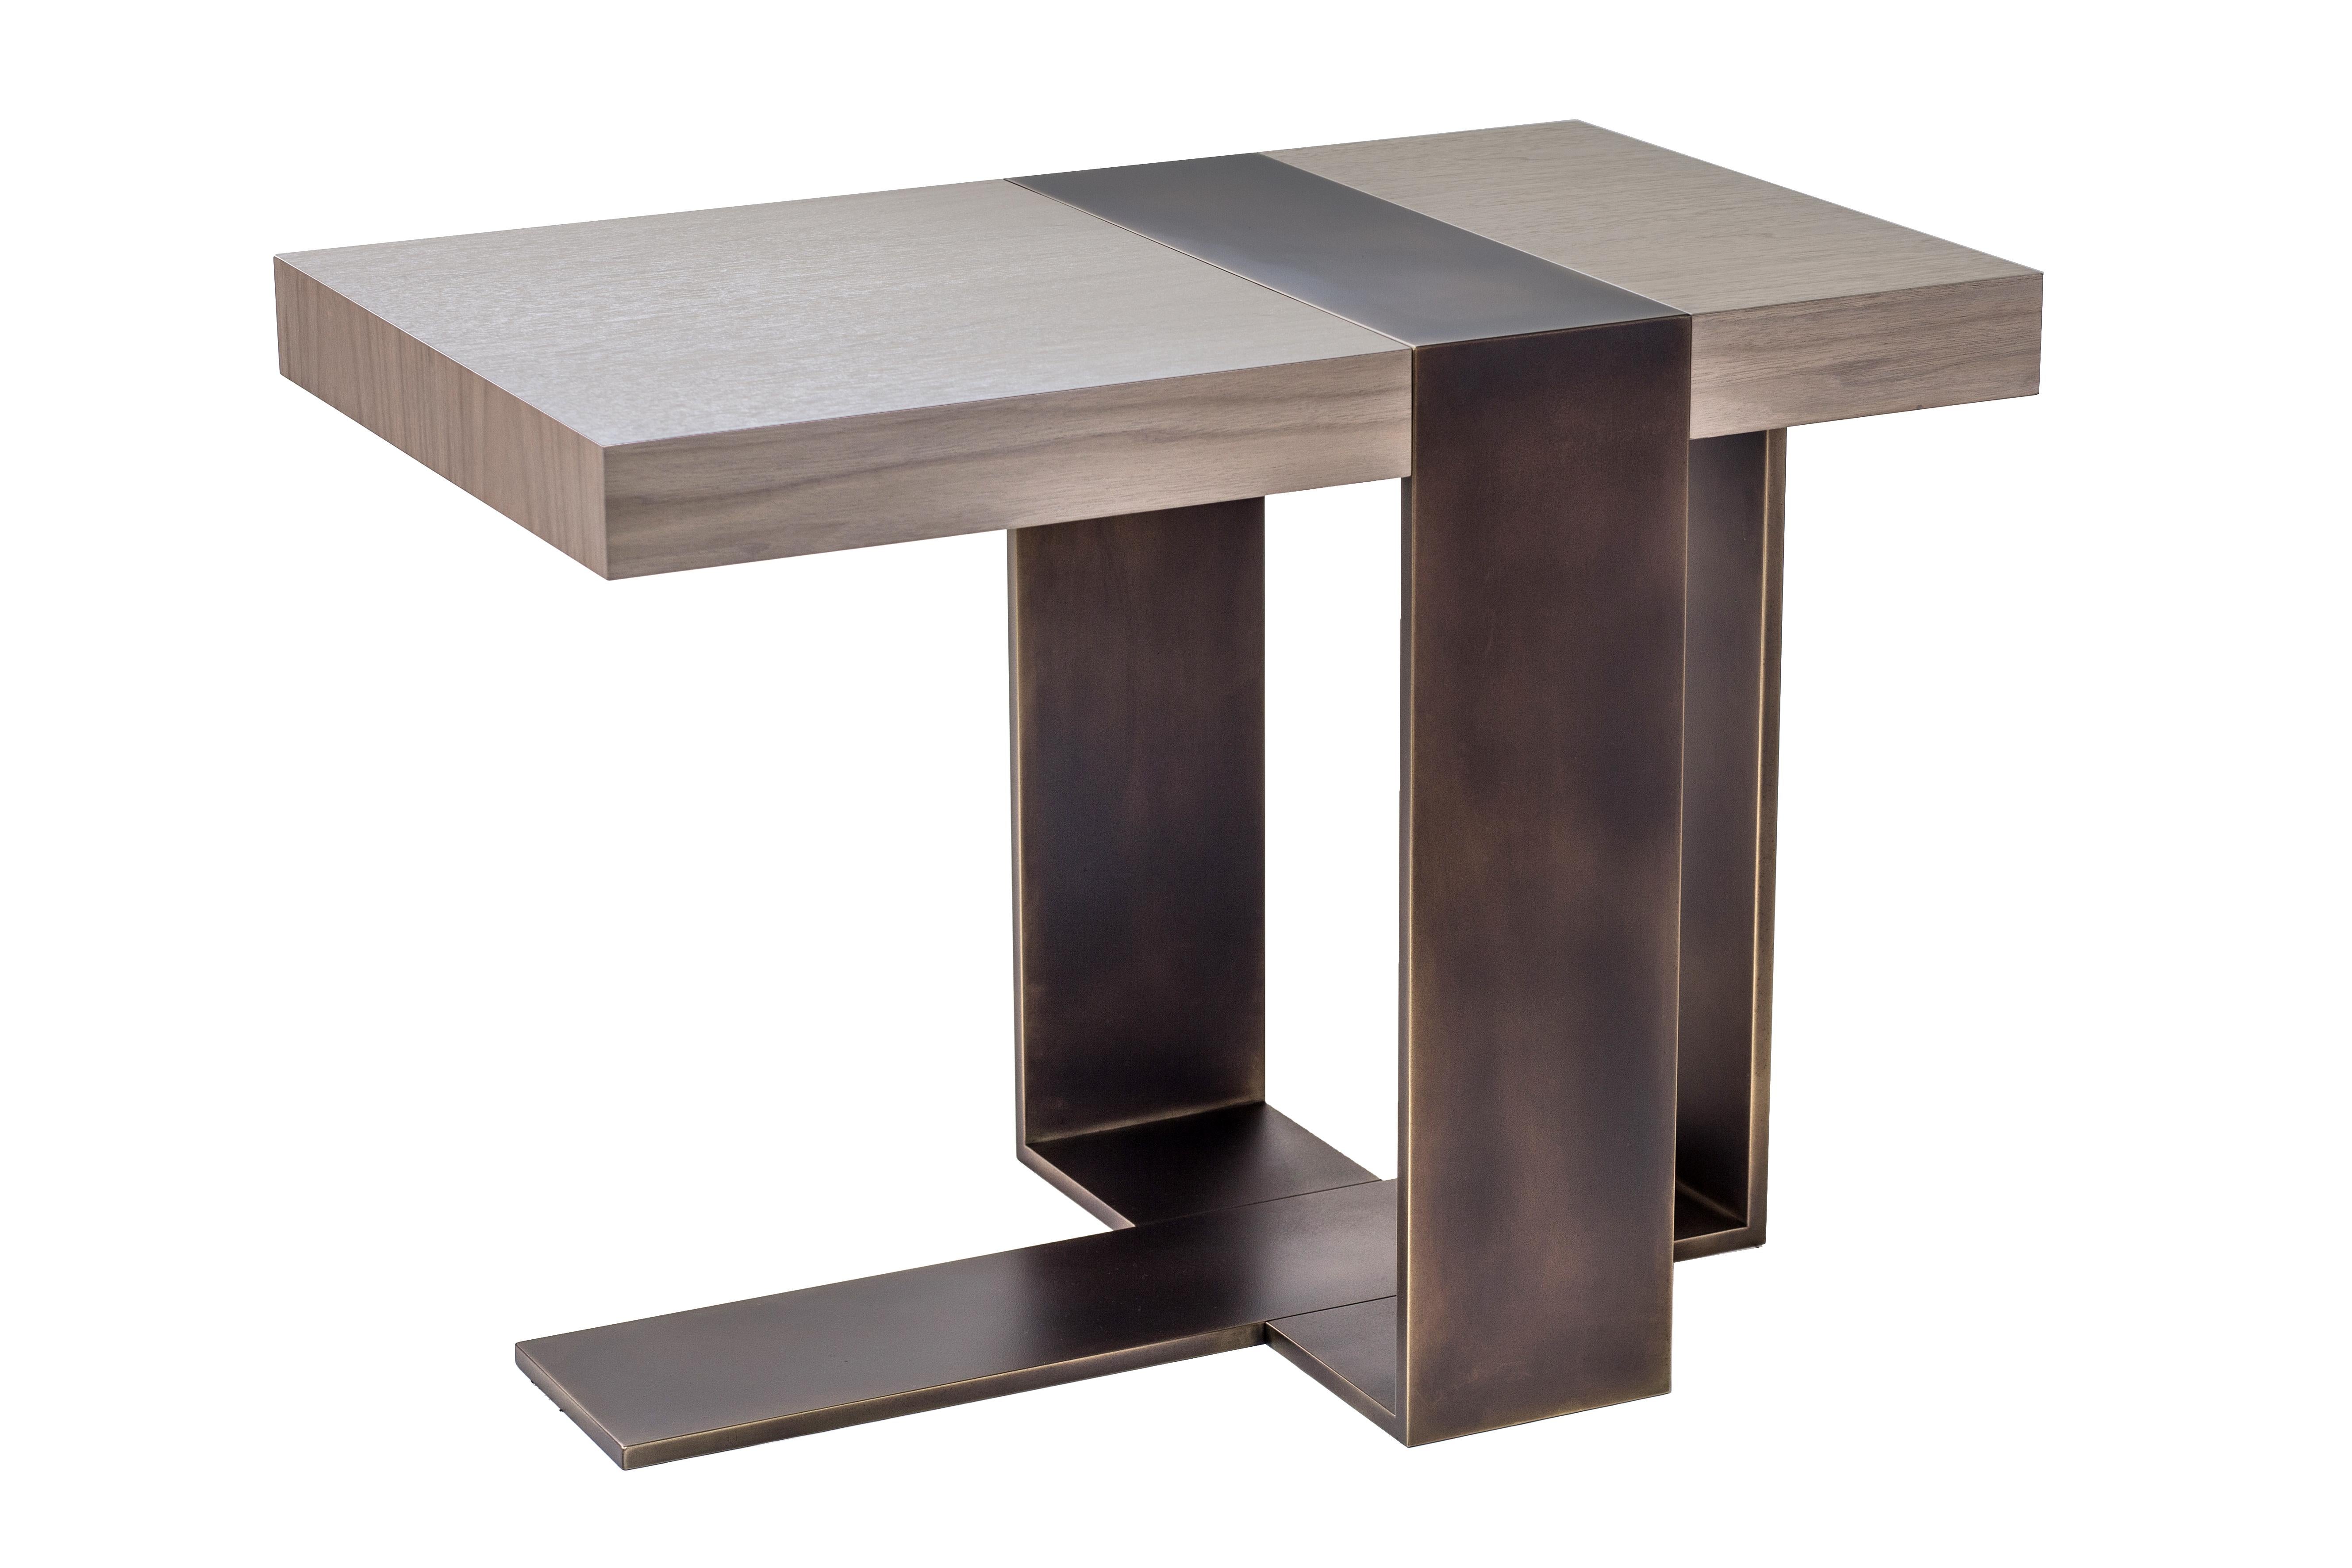 The LUMA Design Workshop strap occasional table is the result of thoughtful design and expert craftsmanship. A Stone Oak top is neatly supported by a dark bronze strap leg and base.

Like all LUMA Furniture, this piece is made to order, and can be